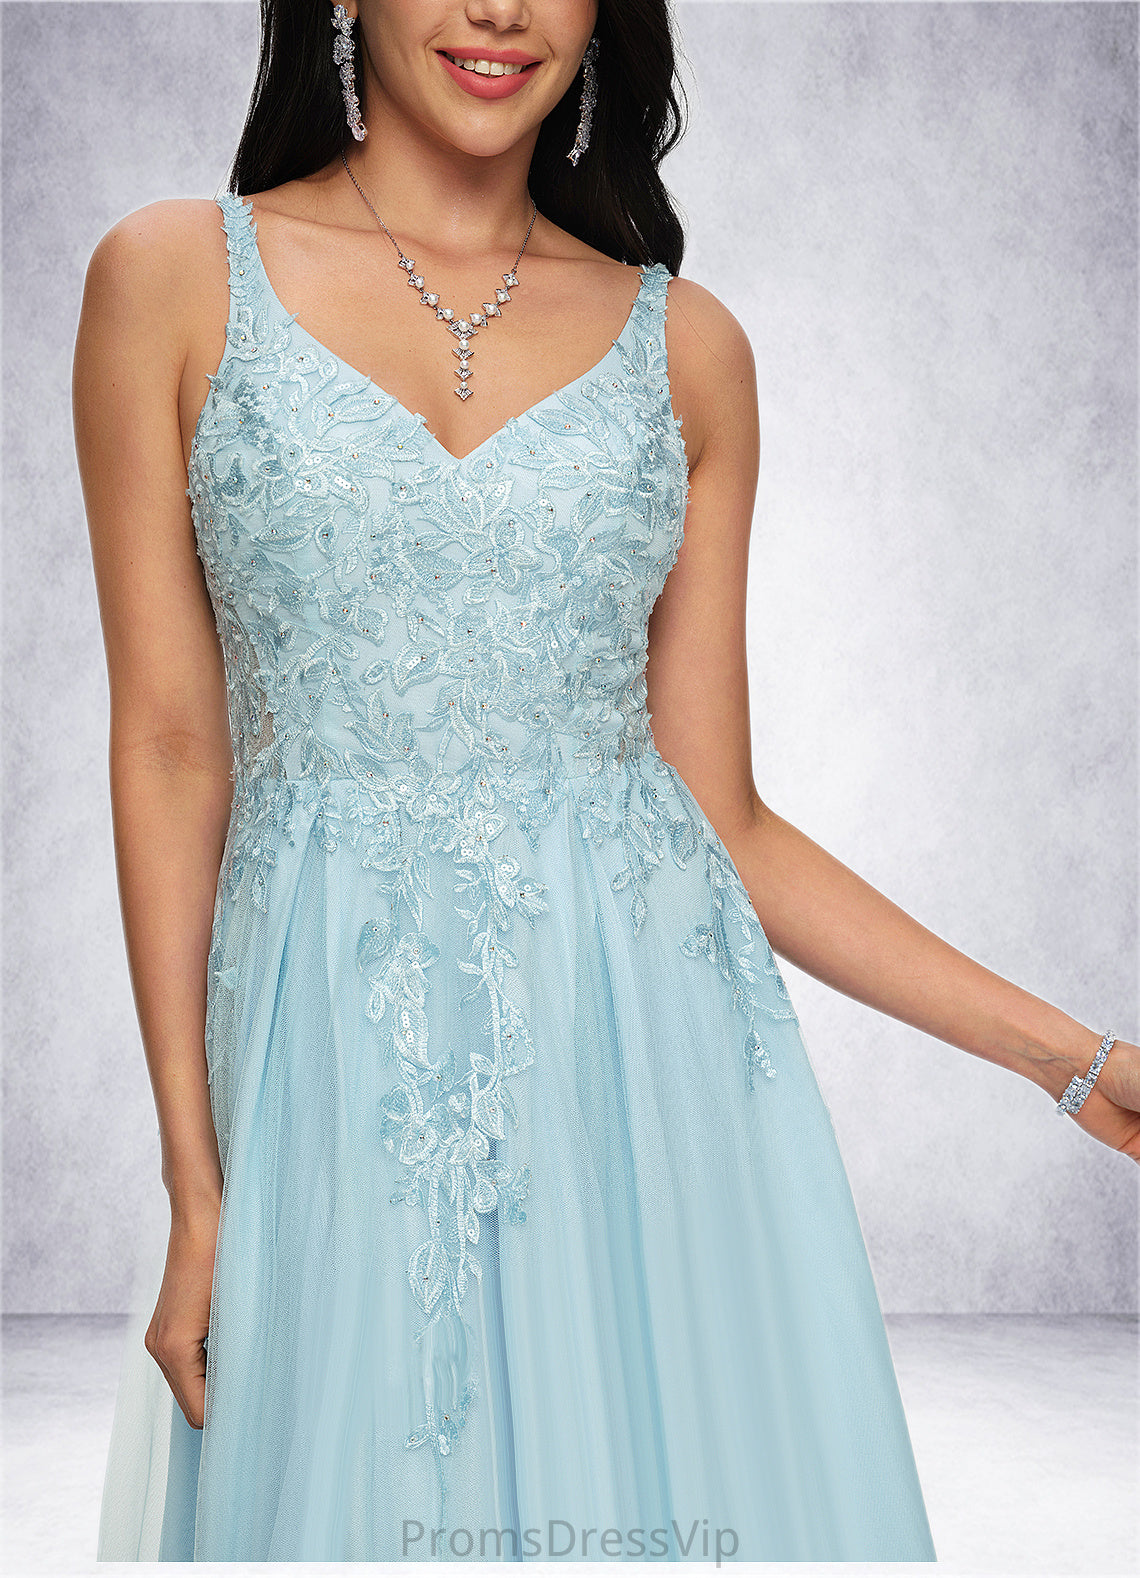 Isabela A-line V-Neck Floor-Length Tulle Prom Dresses With Rhinestone Appliques Lace Sequins HLP0022225